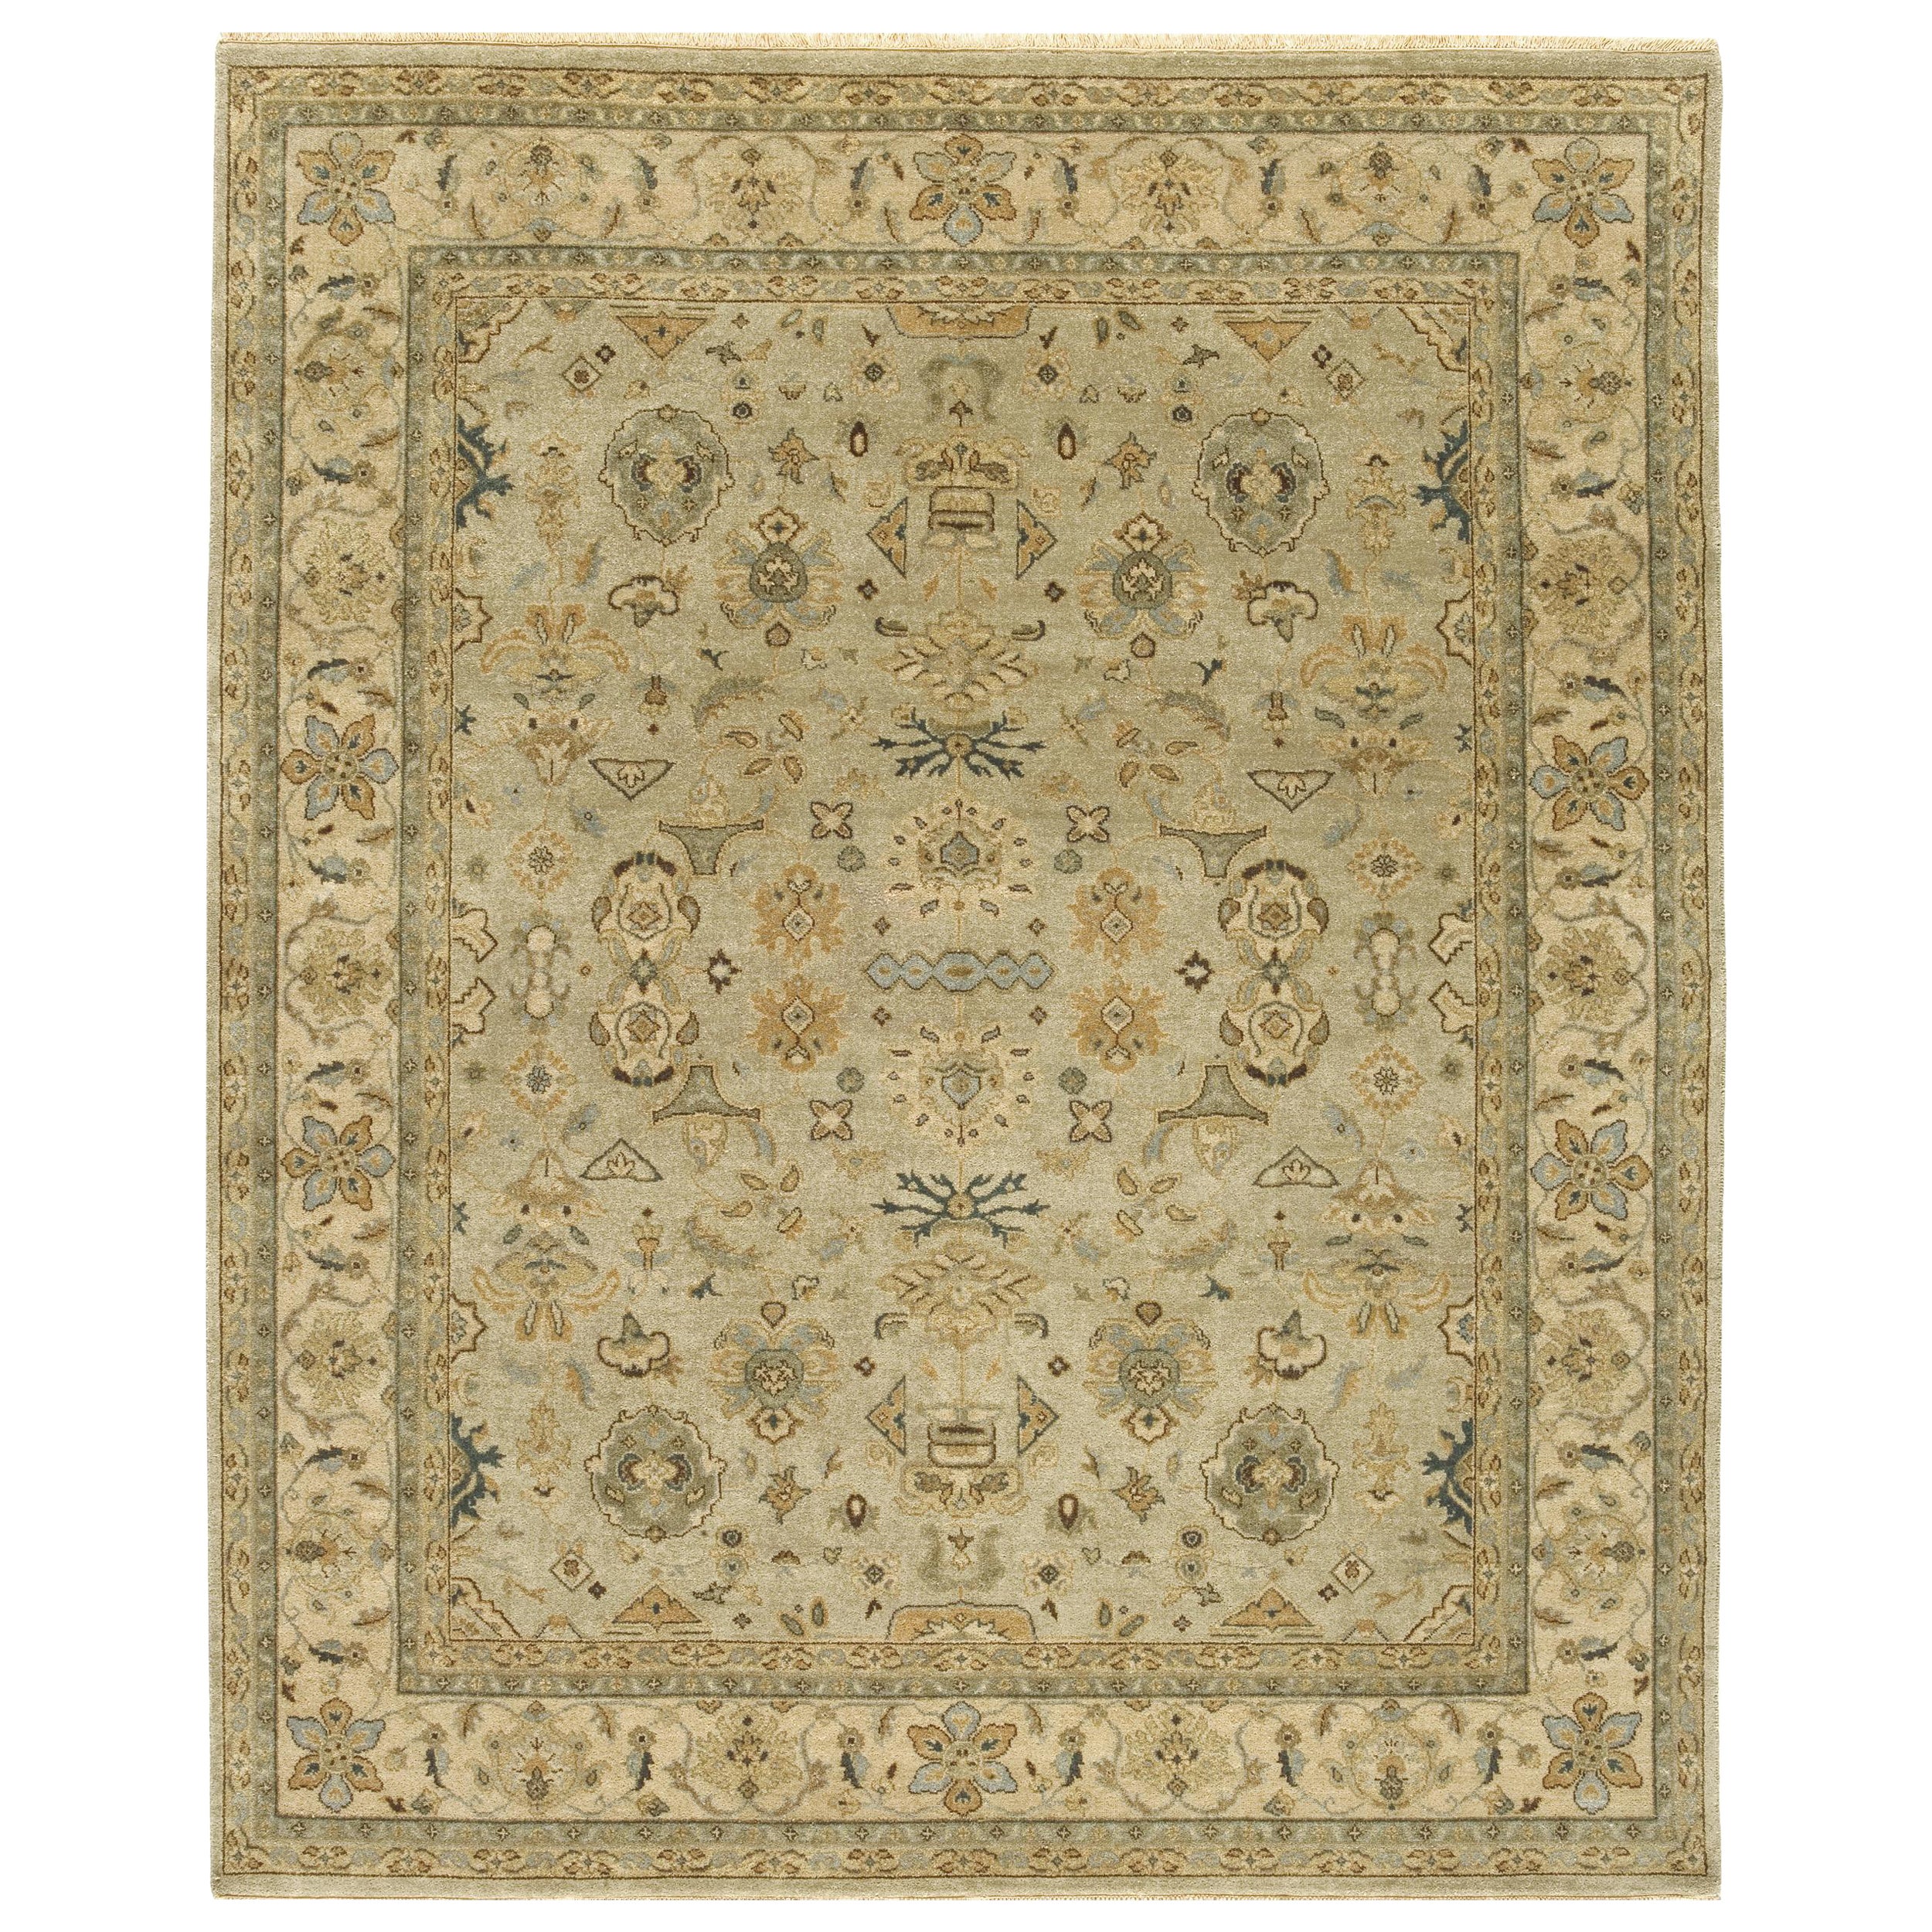 Luxury Traditional Hand-Knotted Mahal Opal & Cream 12x15 Rug